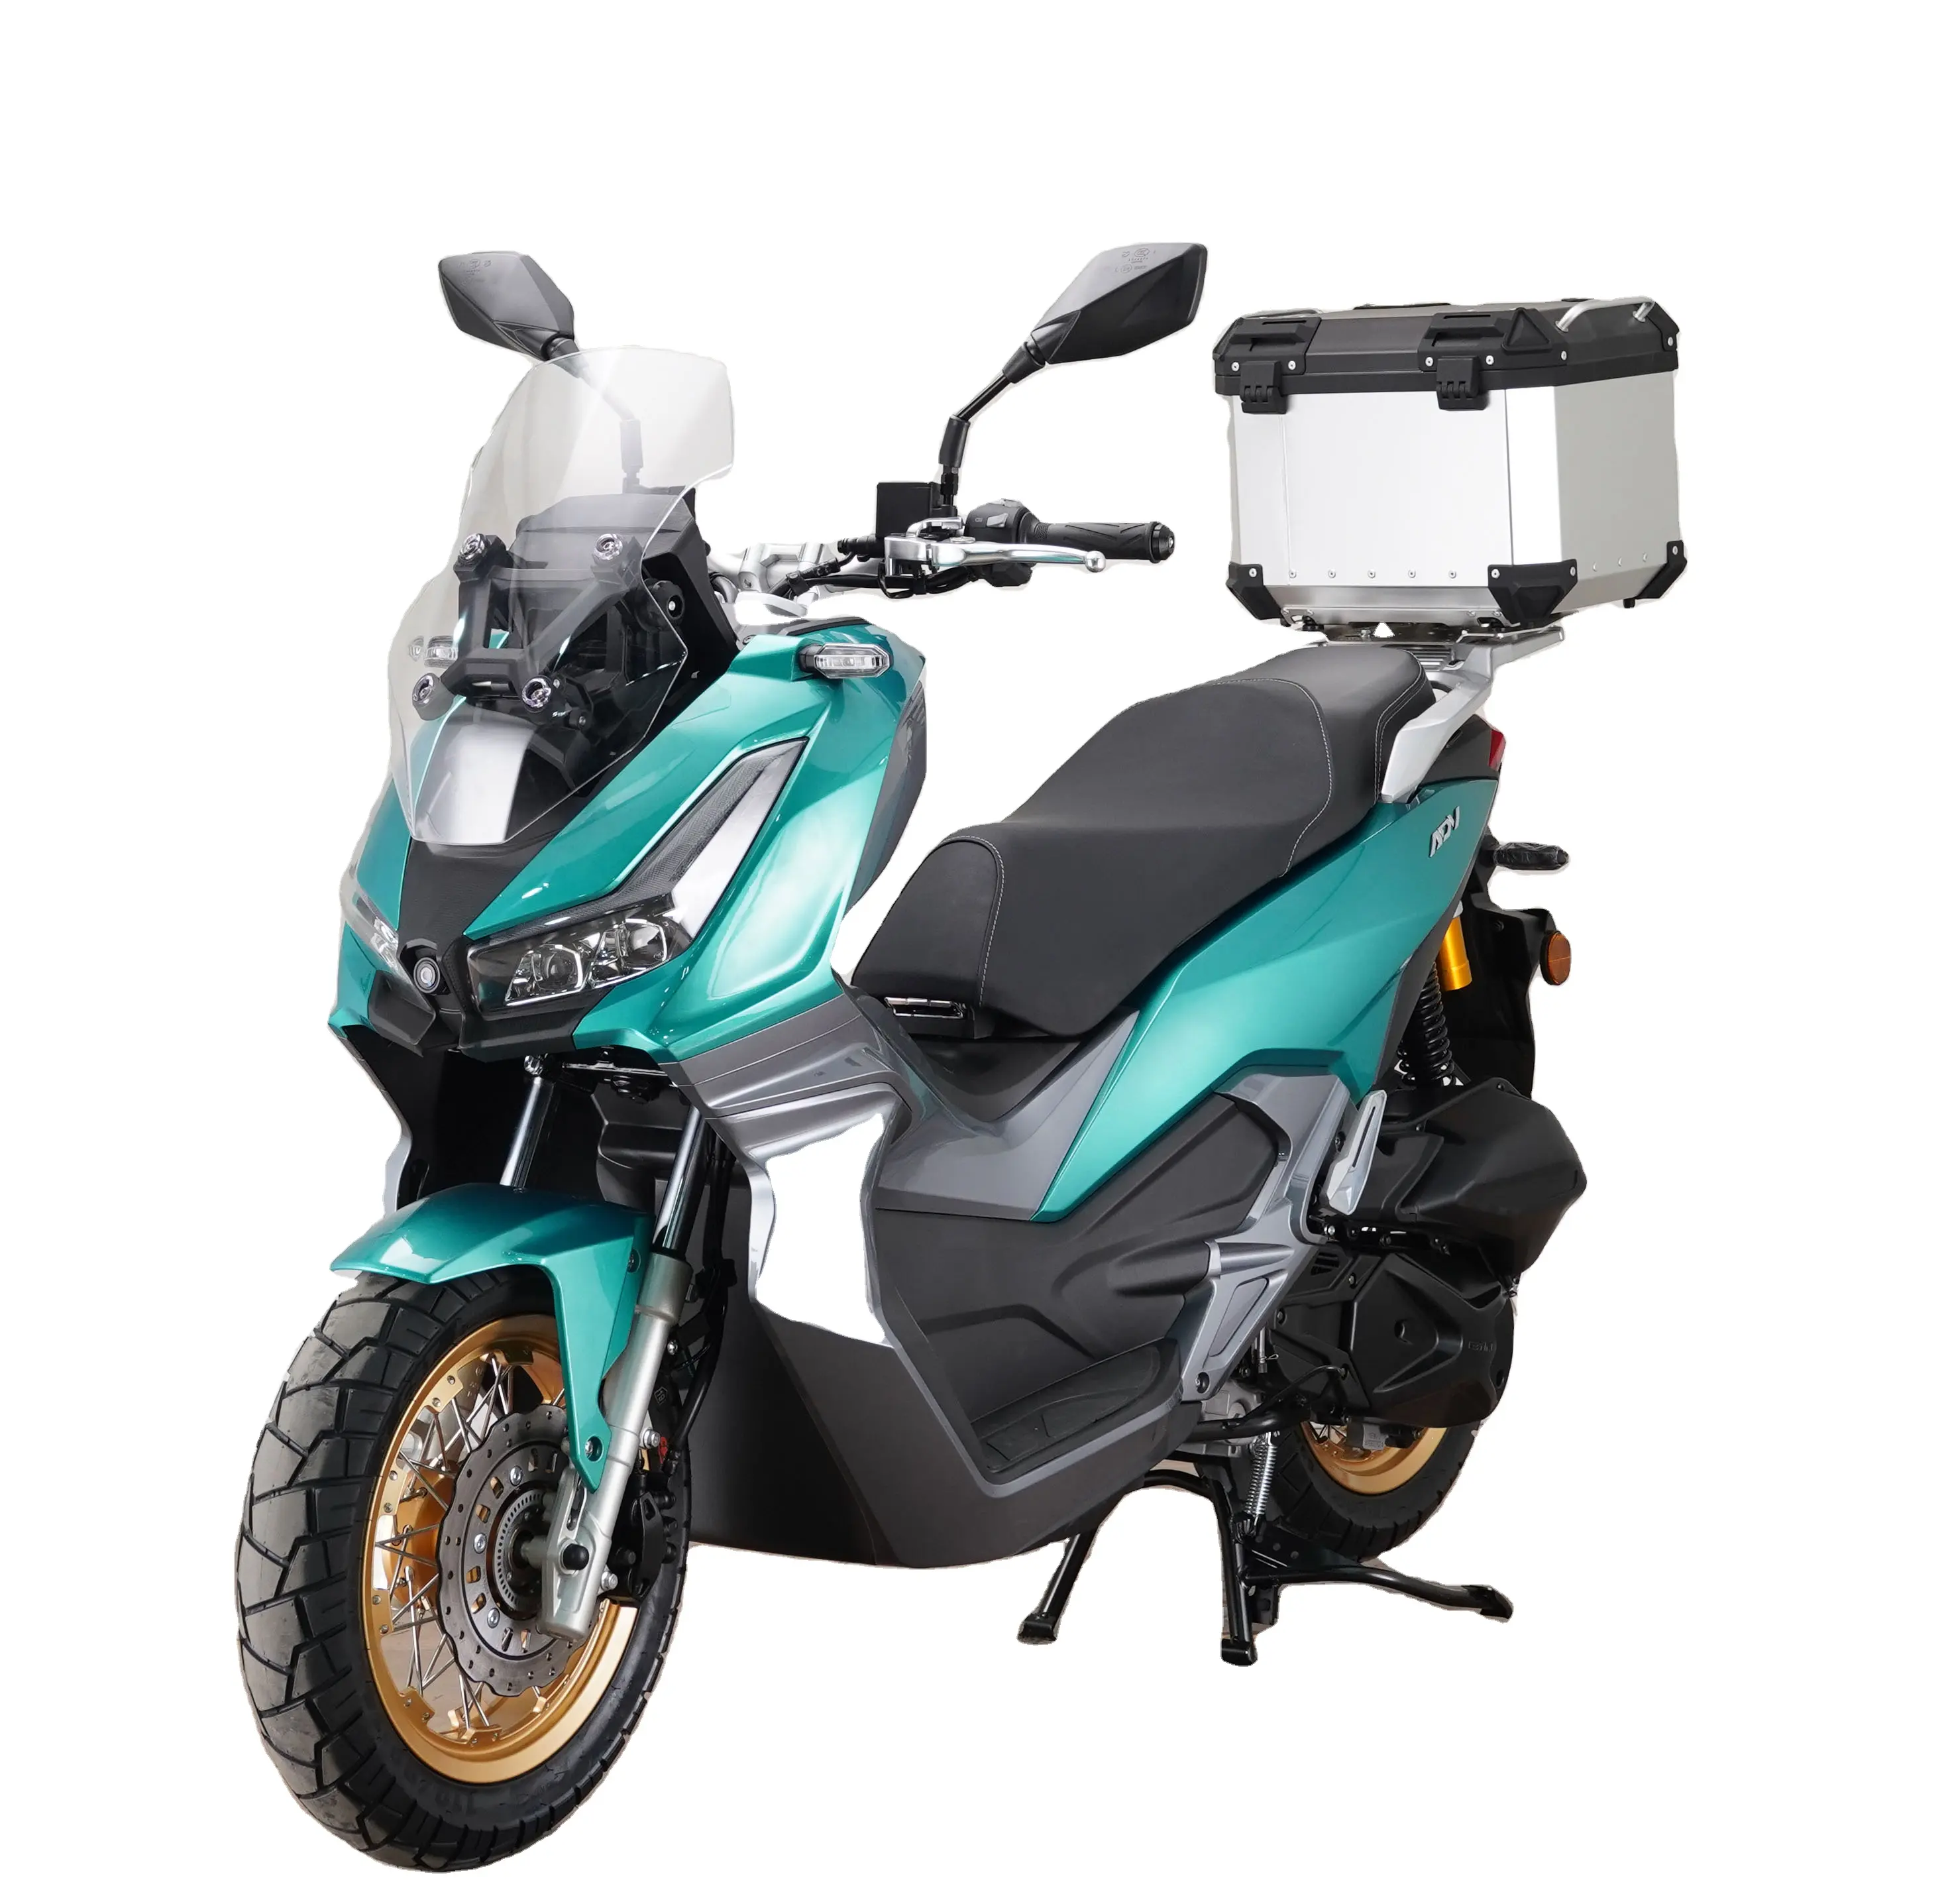 ADV-young / water cooling 50cc 125cc 150cc adult gas scooter moped motorcycle gasoline retro Chinese petrol scooter 50cc